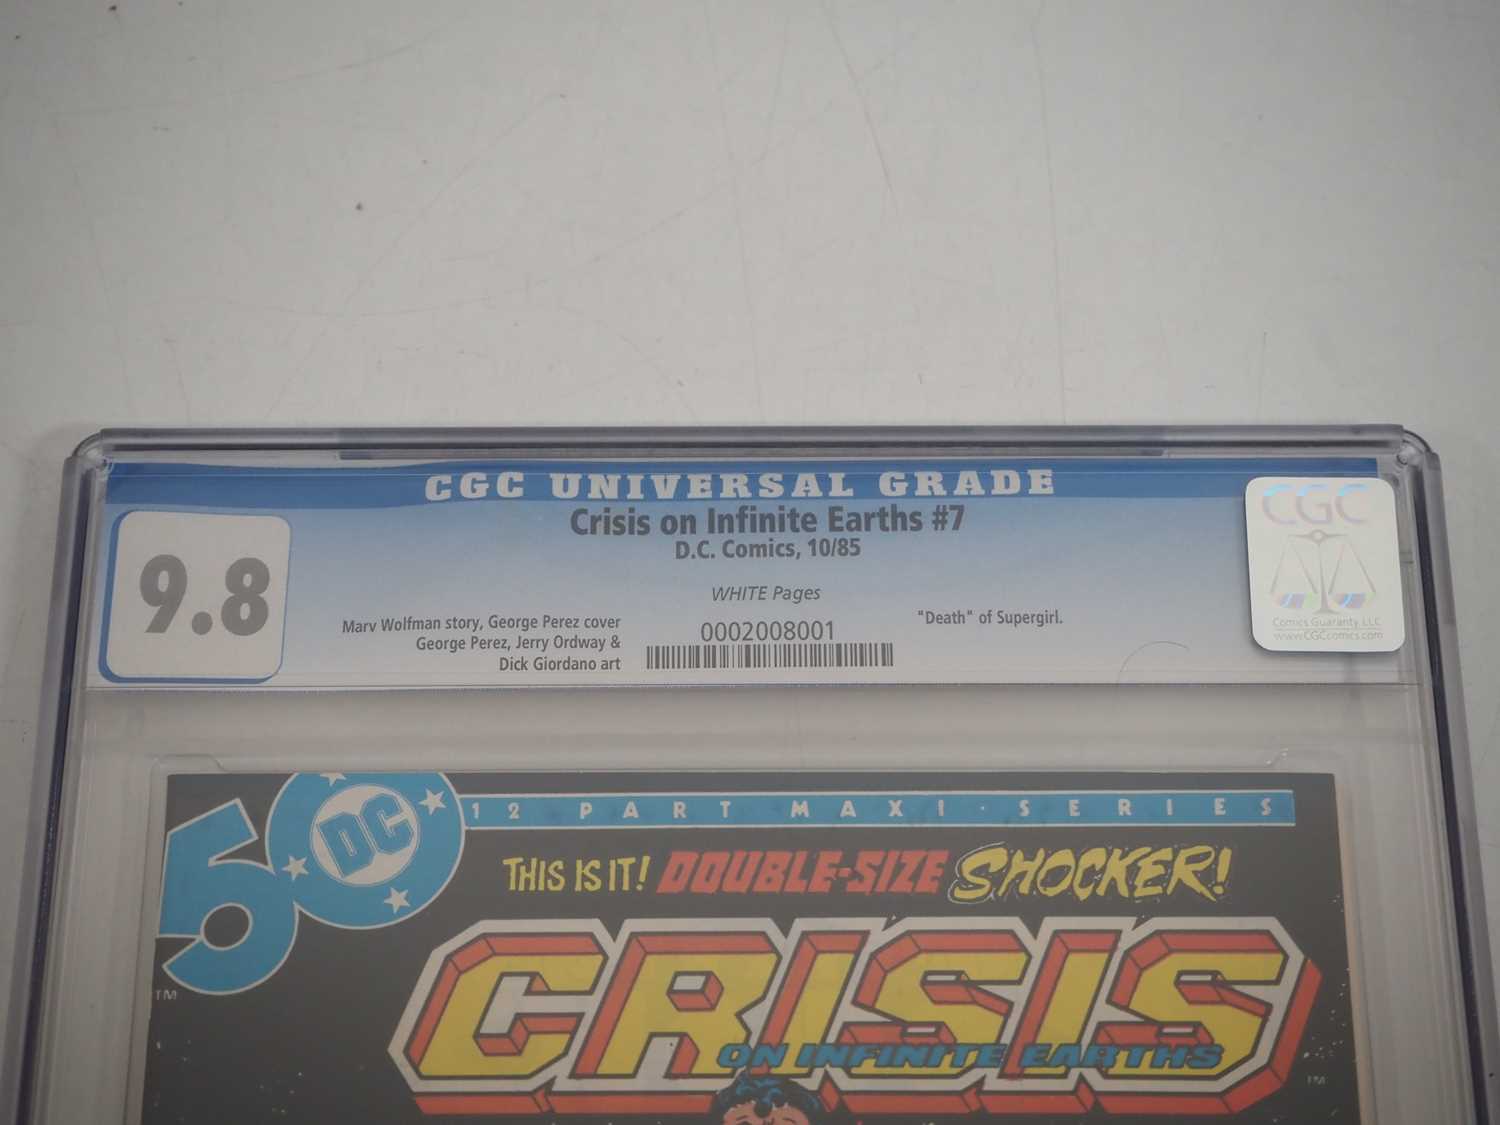 CRISIS ON INFINITE EARTHS #7 - (1985 - DC) - GRADED 9.8 (NM/MINT) by CGC - Part 7 which includes the - Image 3 of 4